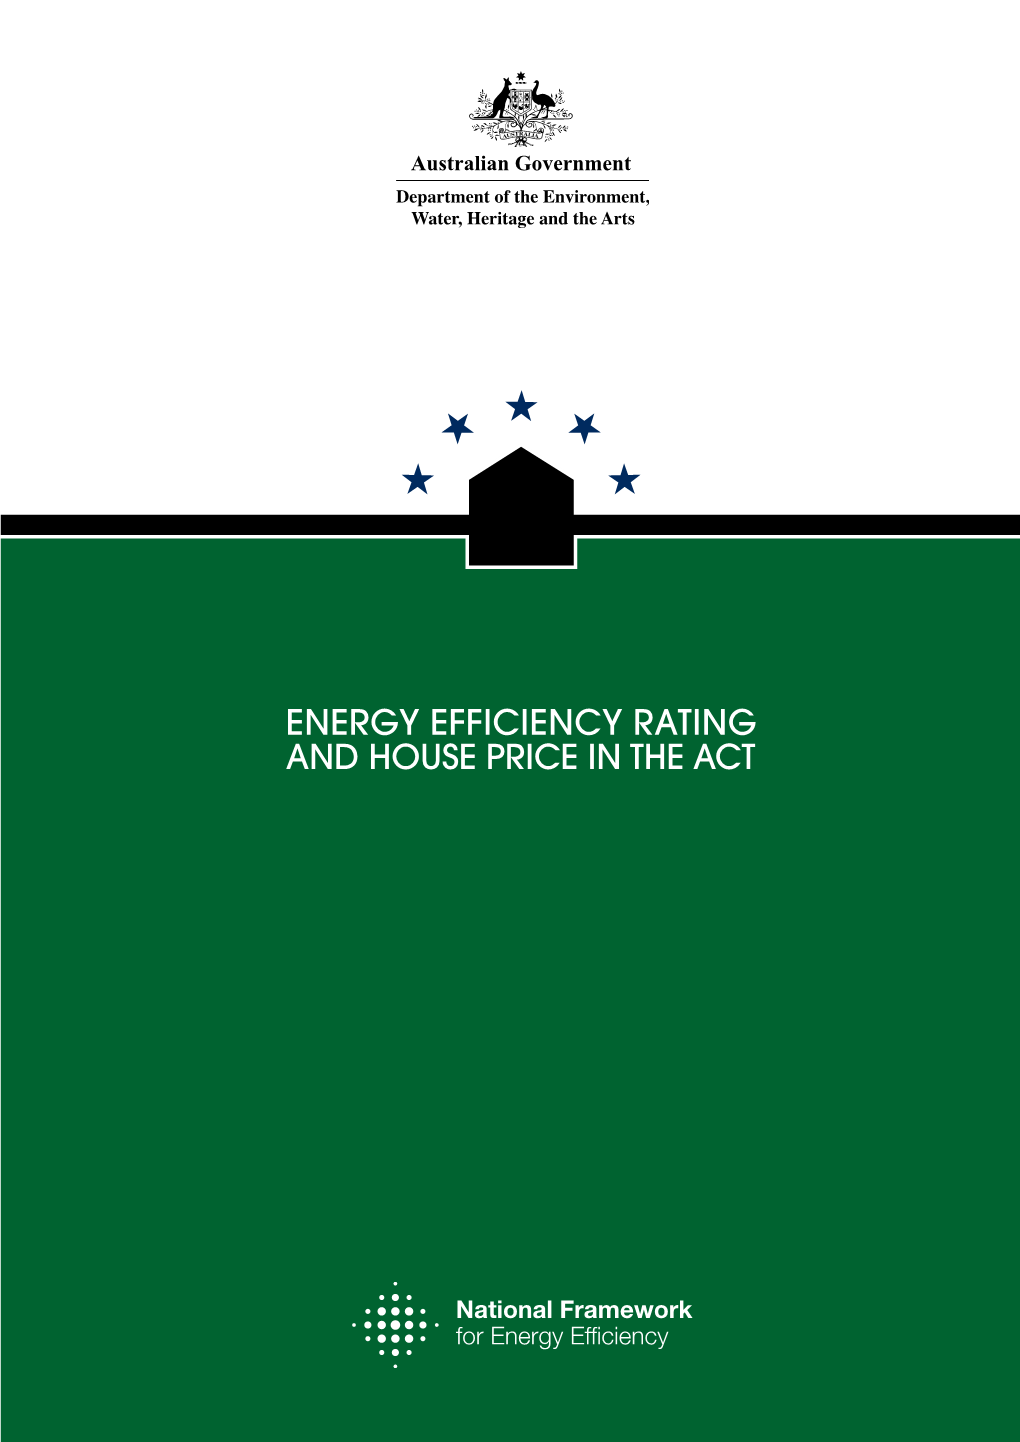 Energy Efficiency Rating and House Price in the Act